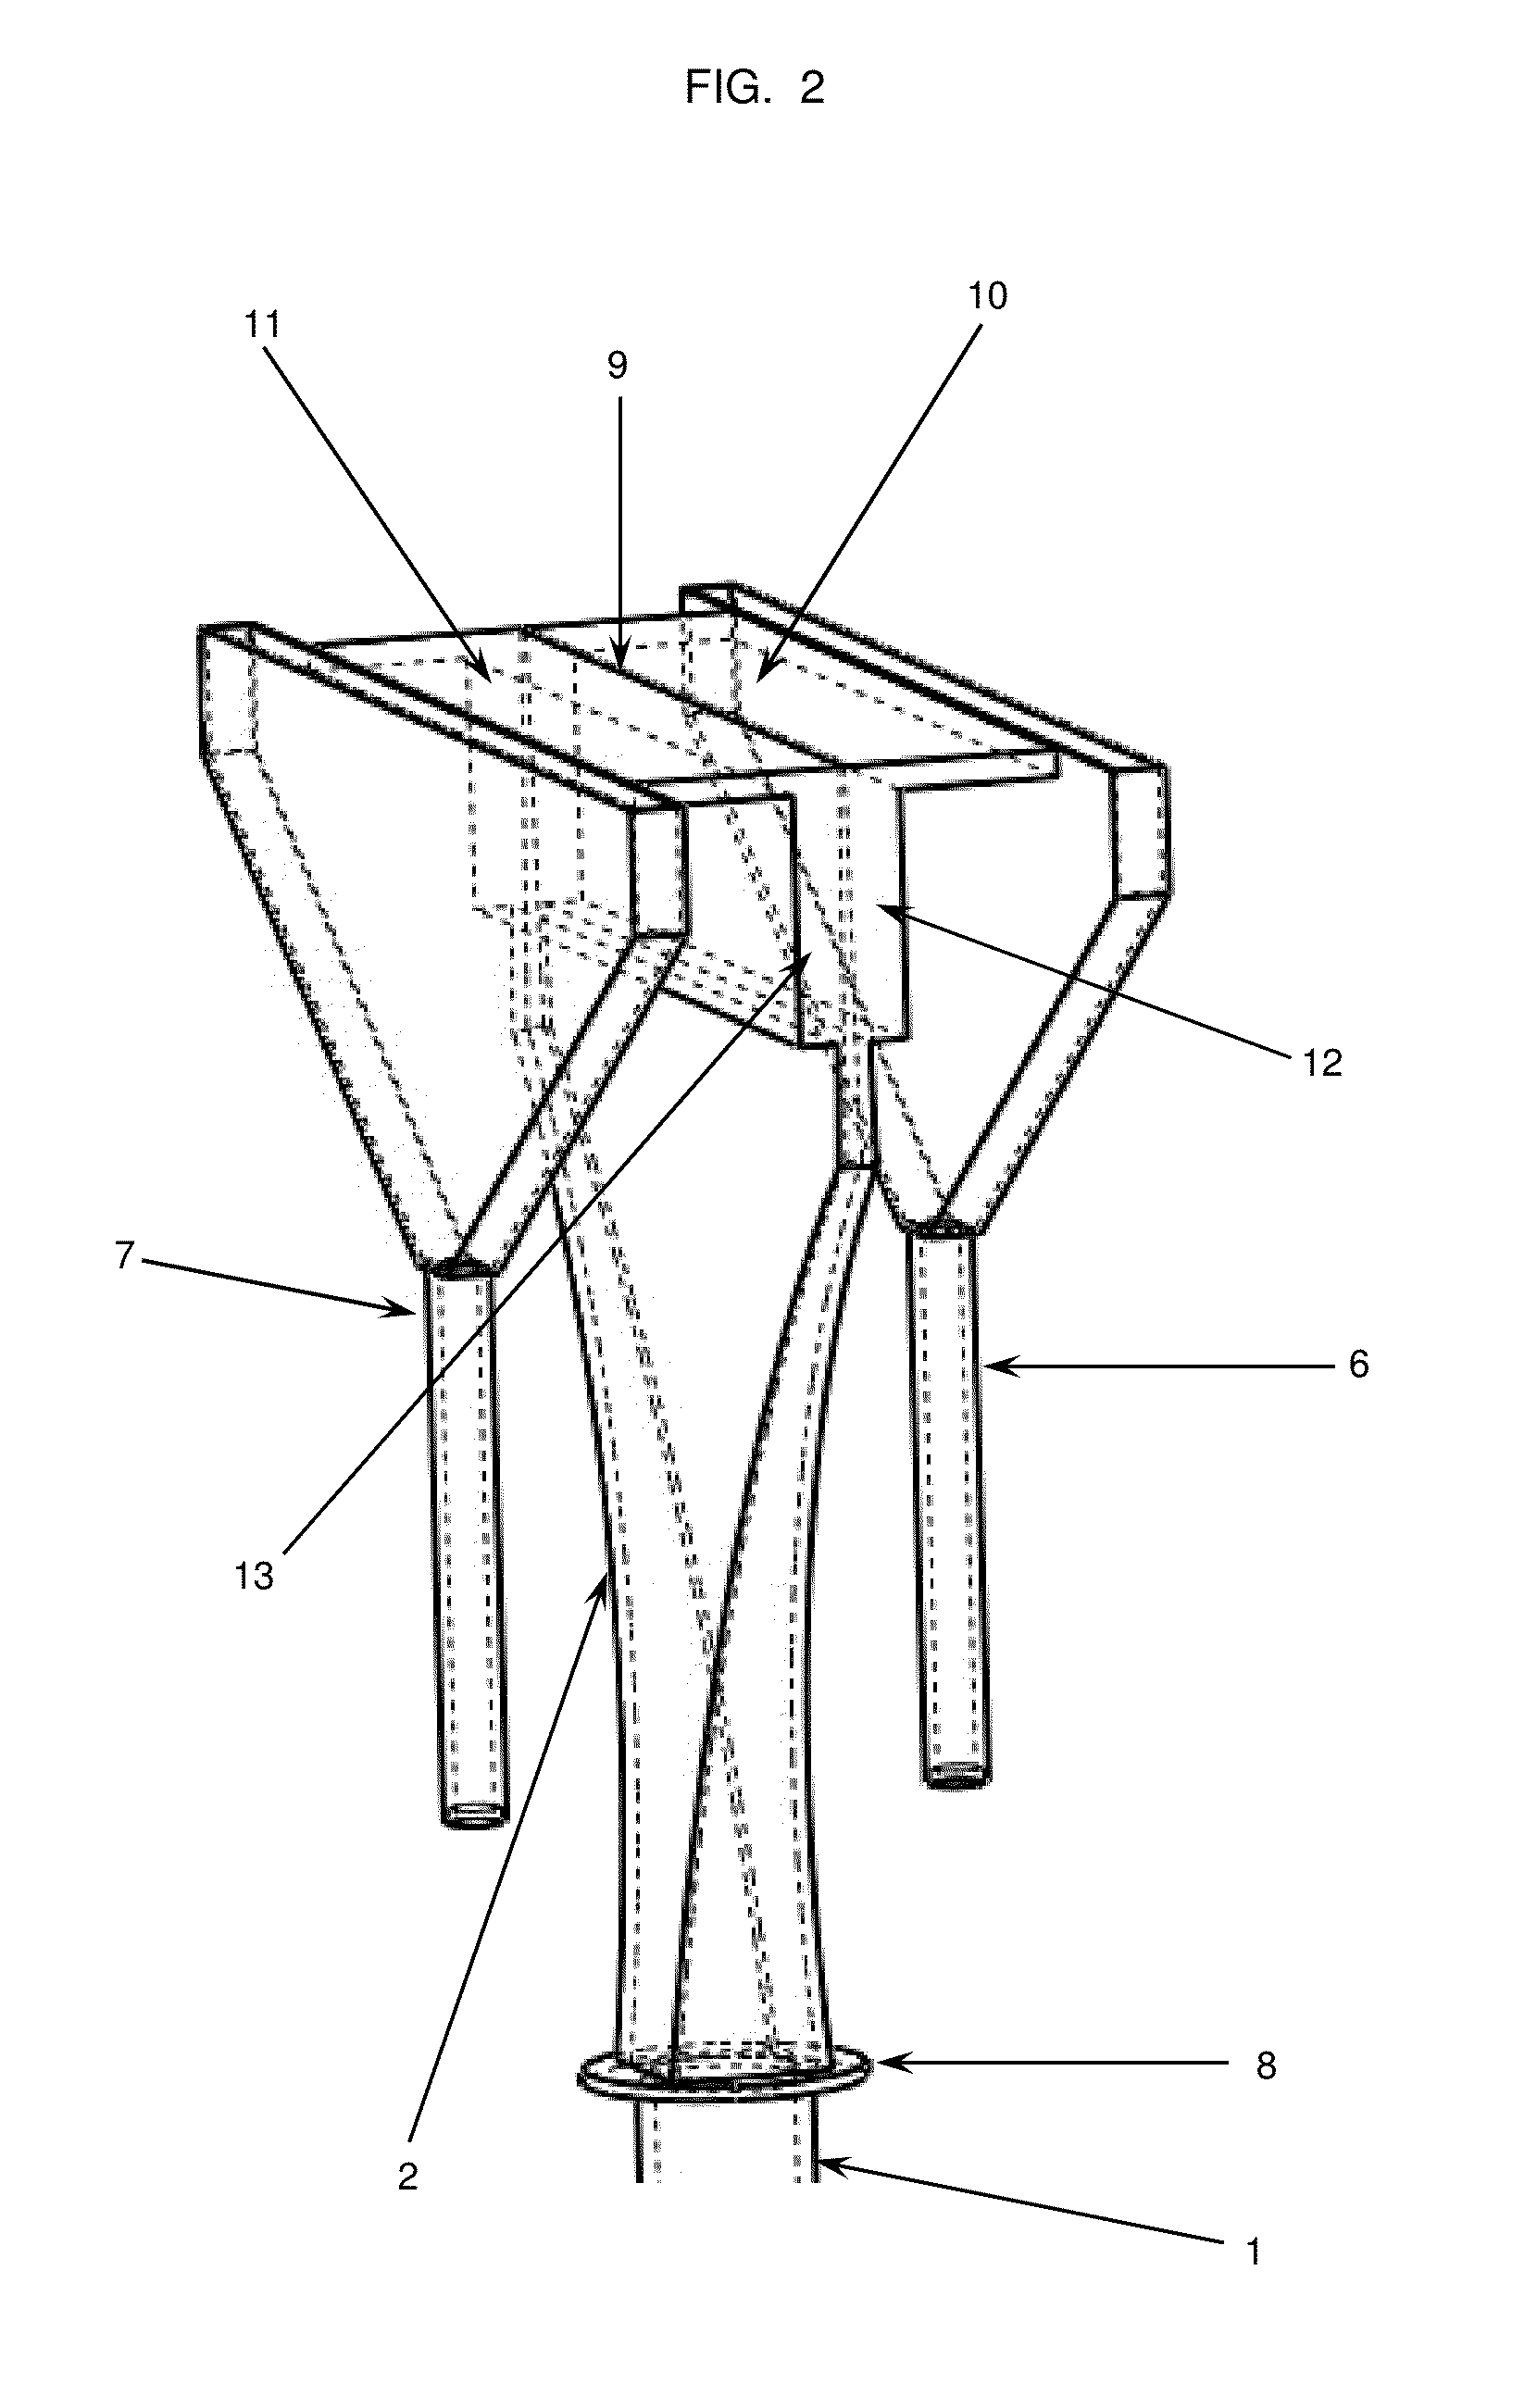 Injection nozzle for aerosols and their method of use to deposit different coatings via vapor chemical deposition  assisted by aerosol